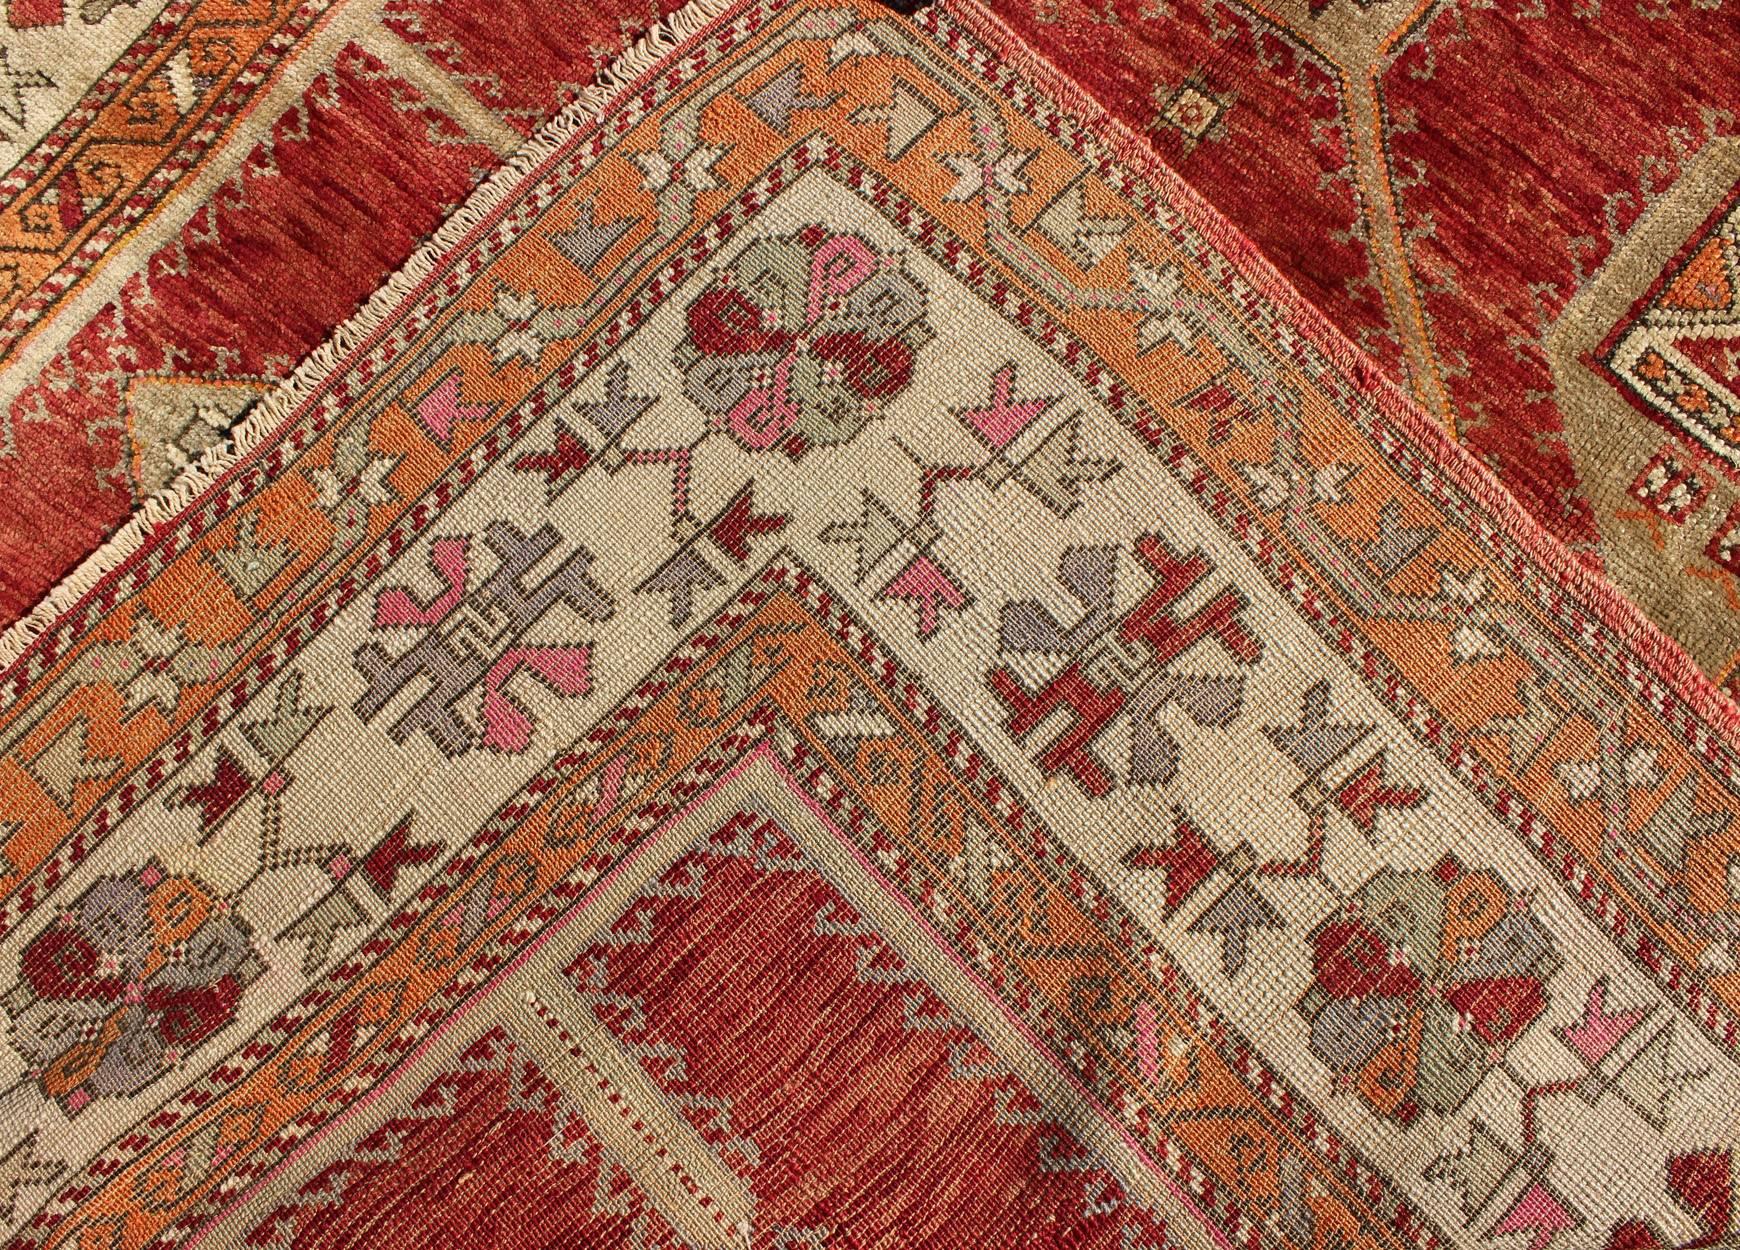 Antique Turkish Oushak Rug With Geometric Design in Red, Light Green & L. Orange For Sale 2